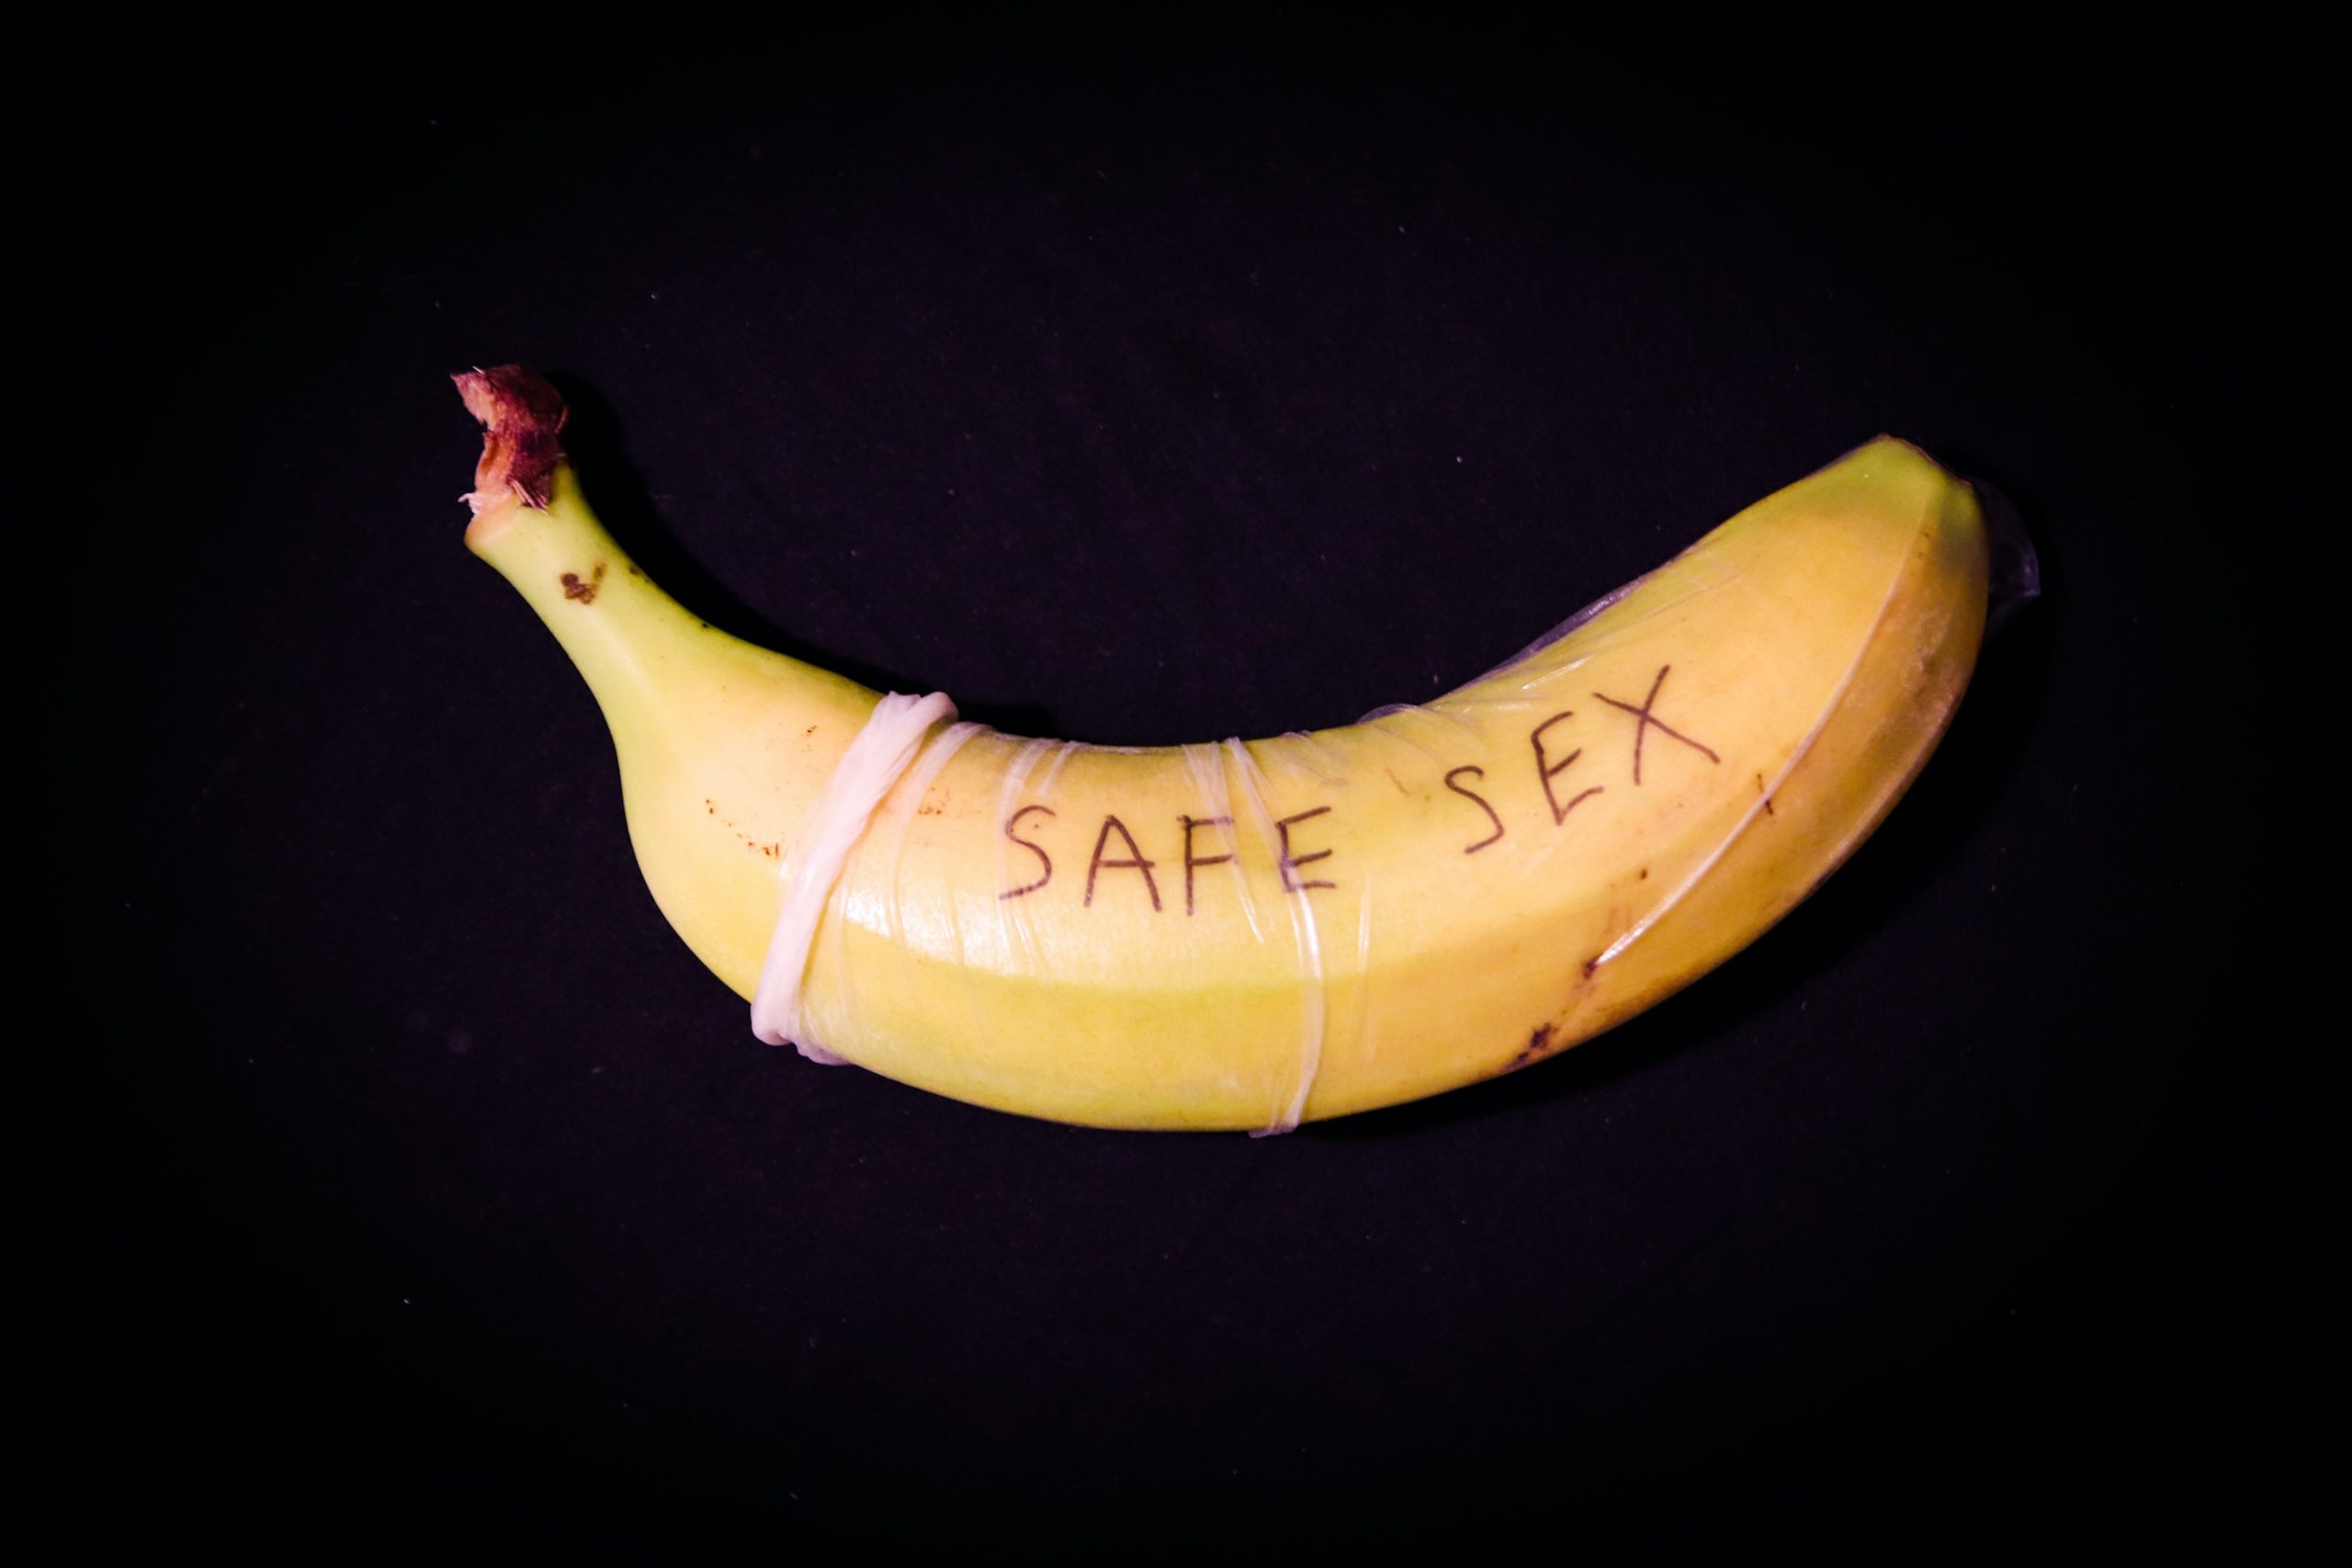 A banana with the words safe sex on it